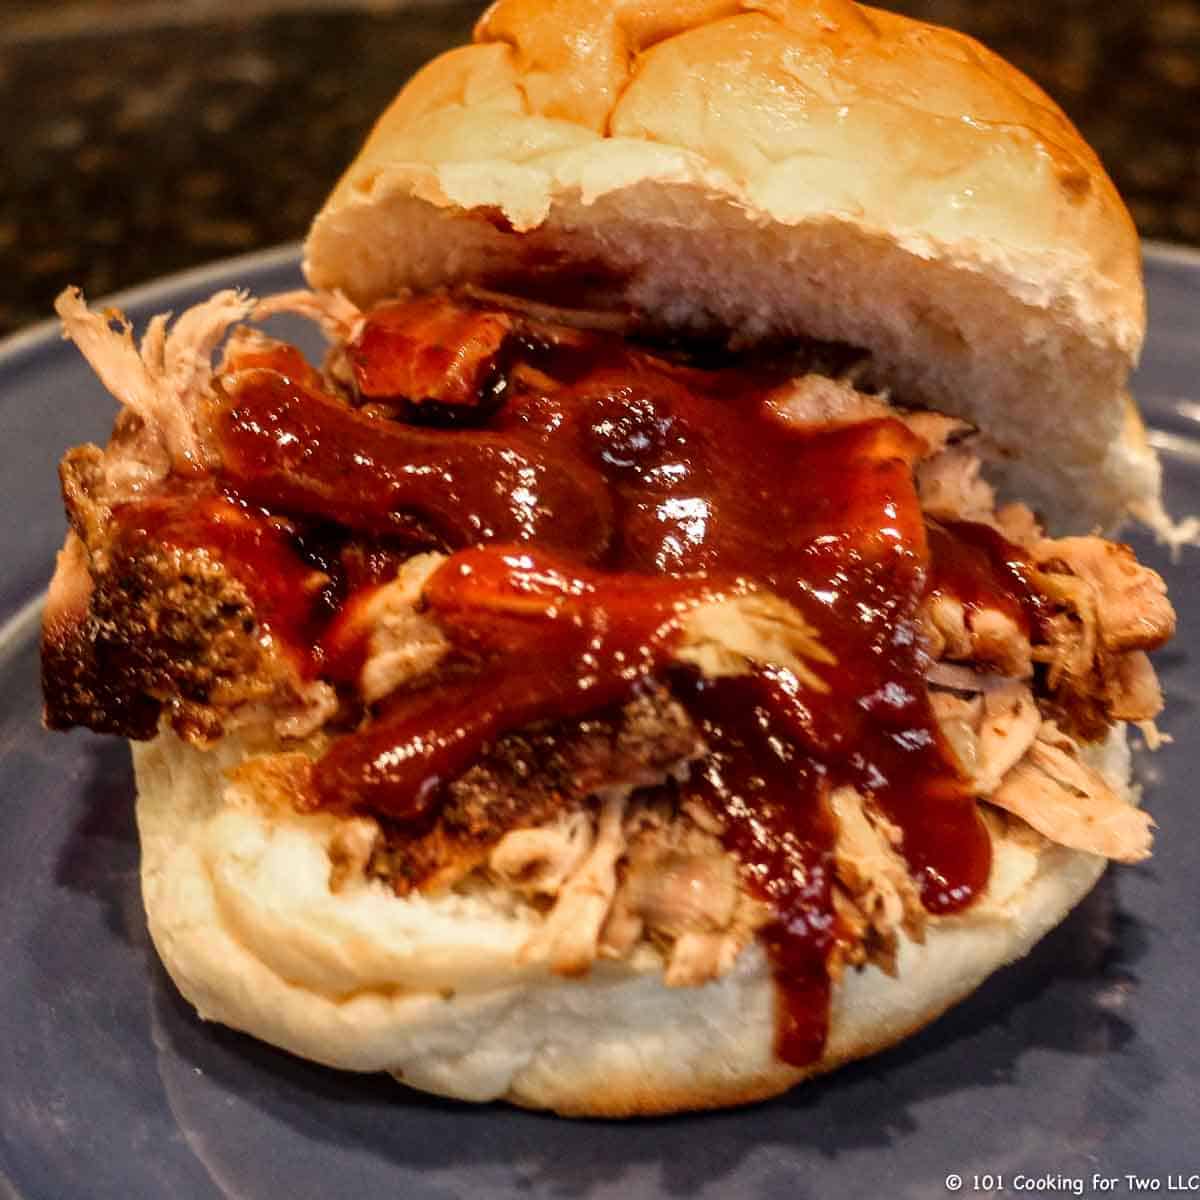 BBQ pulled pork sandwich with sauce on a blue plate.